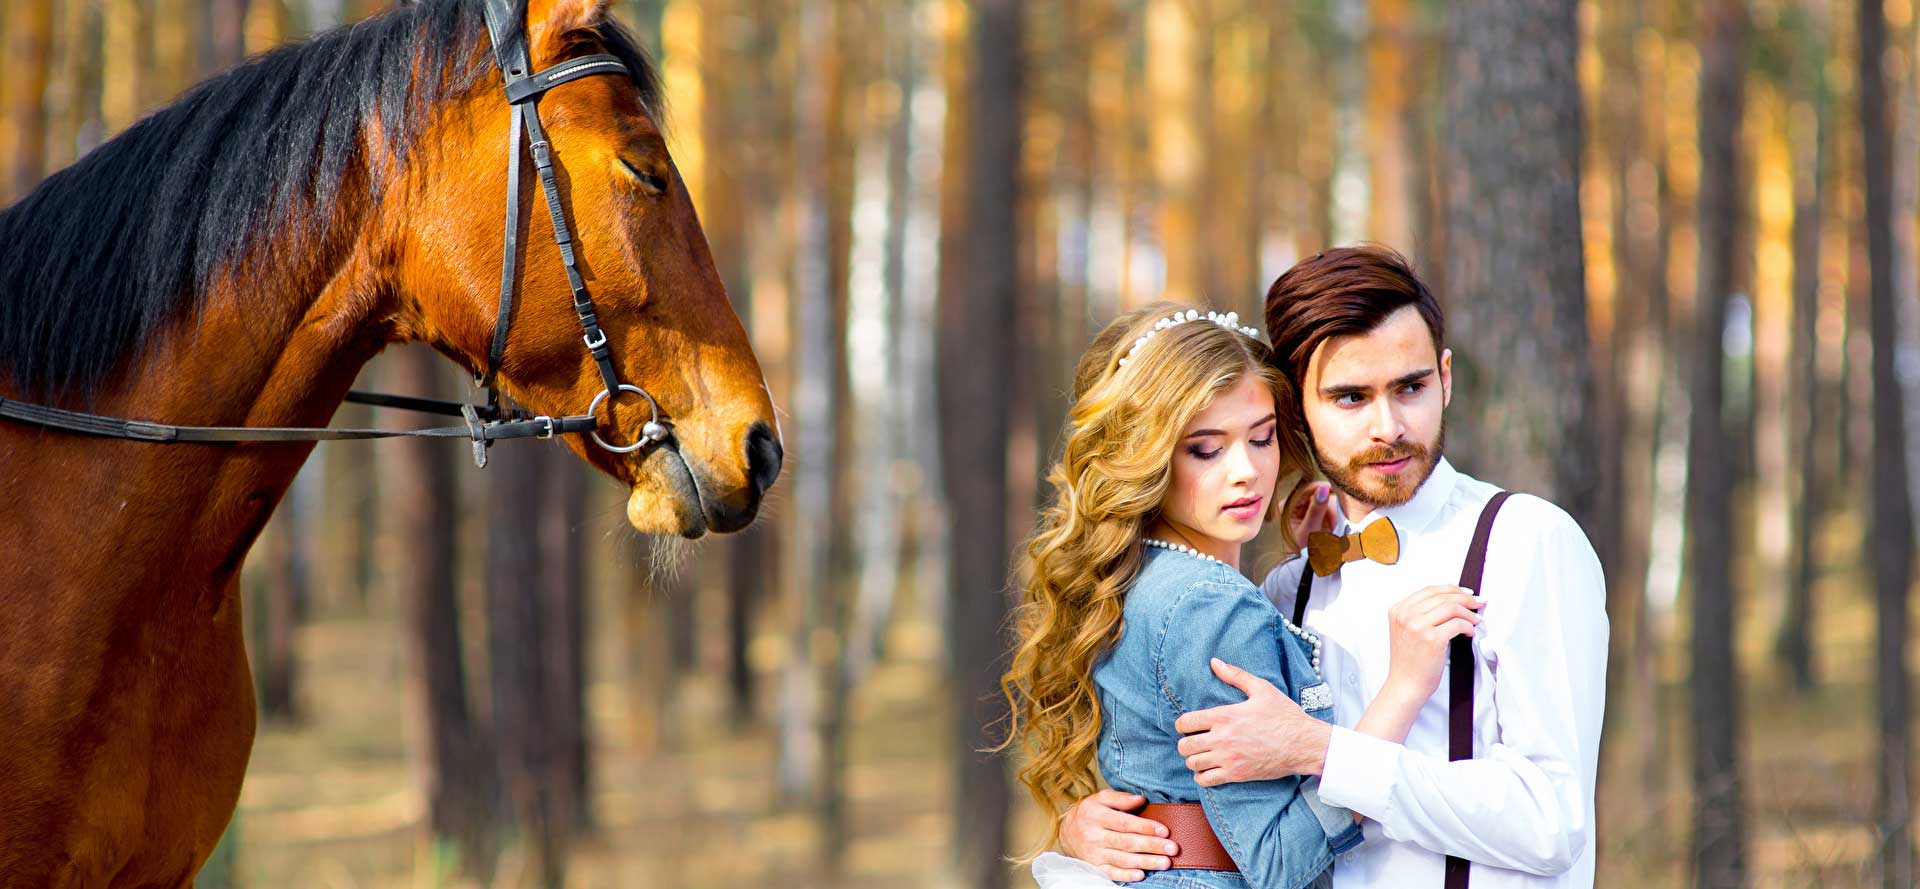 Newlyweds with a Horse.